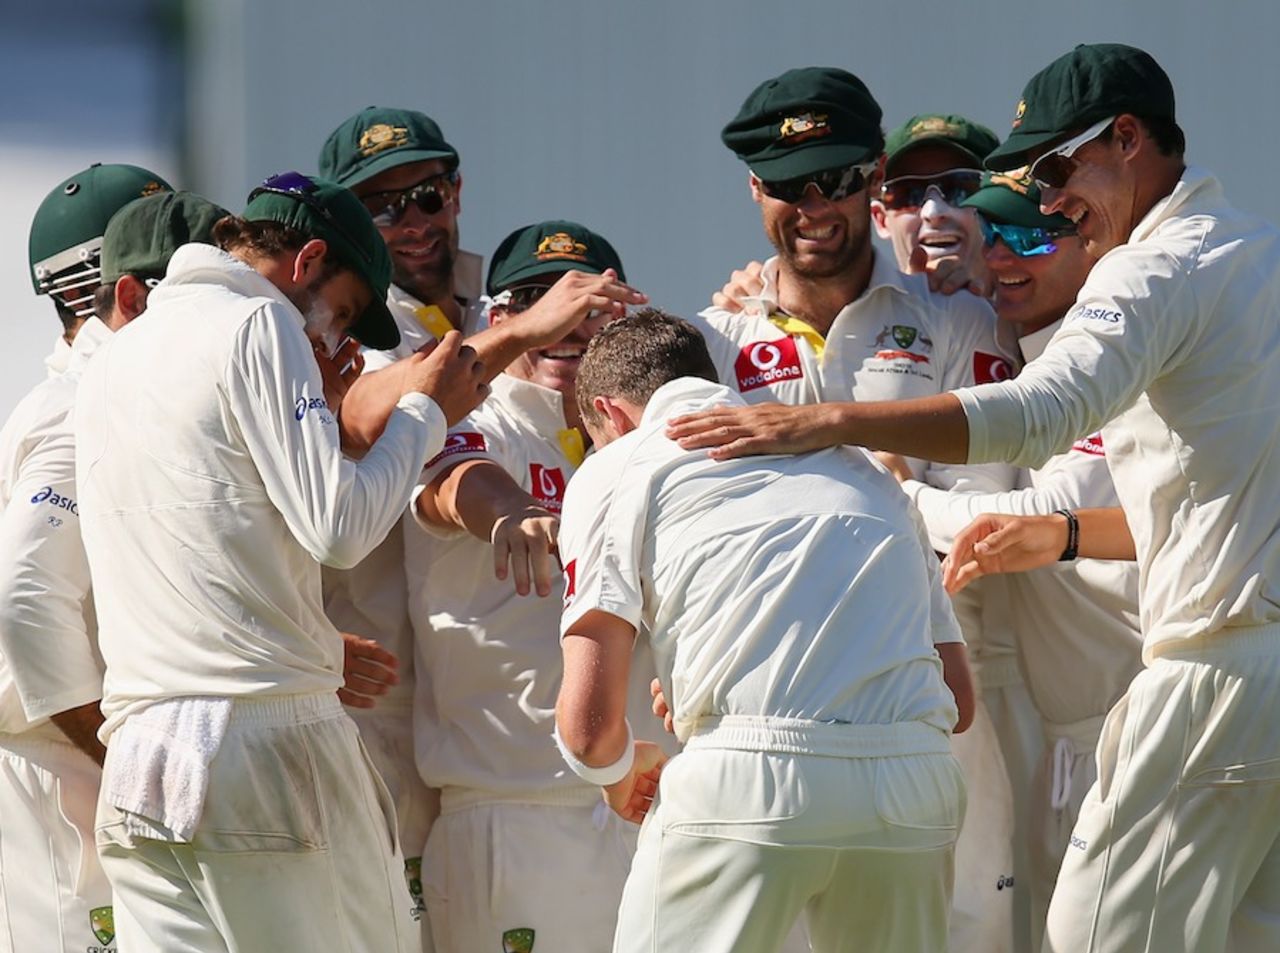 The Australians mob Peter Siddle after Dale Steyn's wicket, Australia v South Africa, 2nd Test, Adelaide, 5th day, November 26, 2012